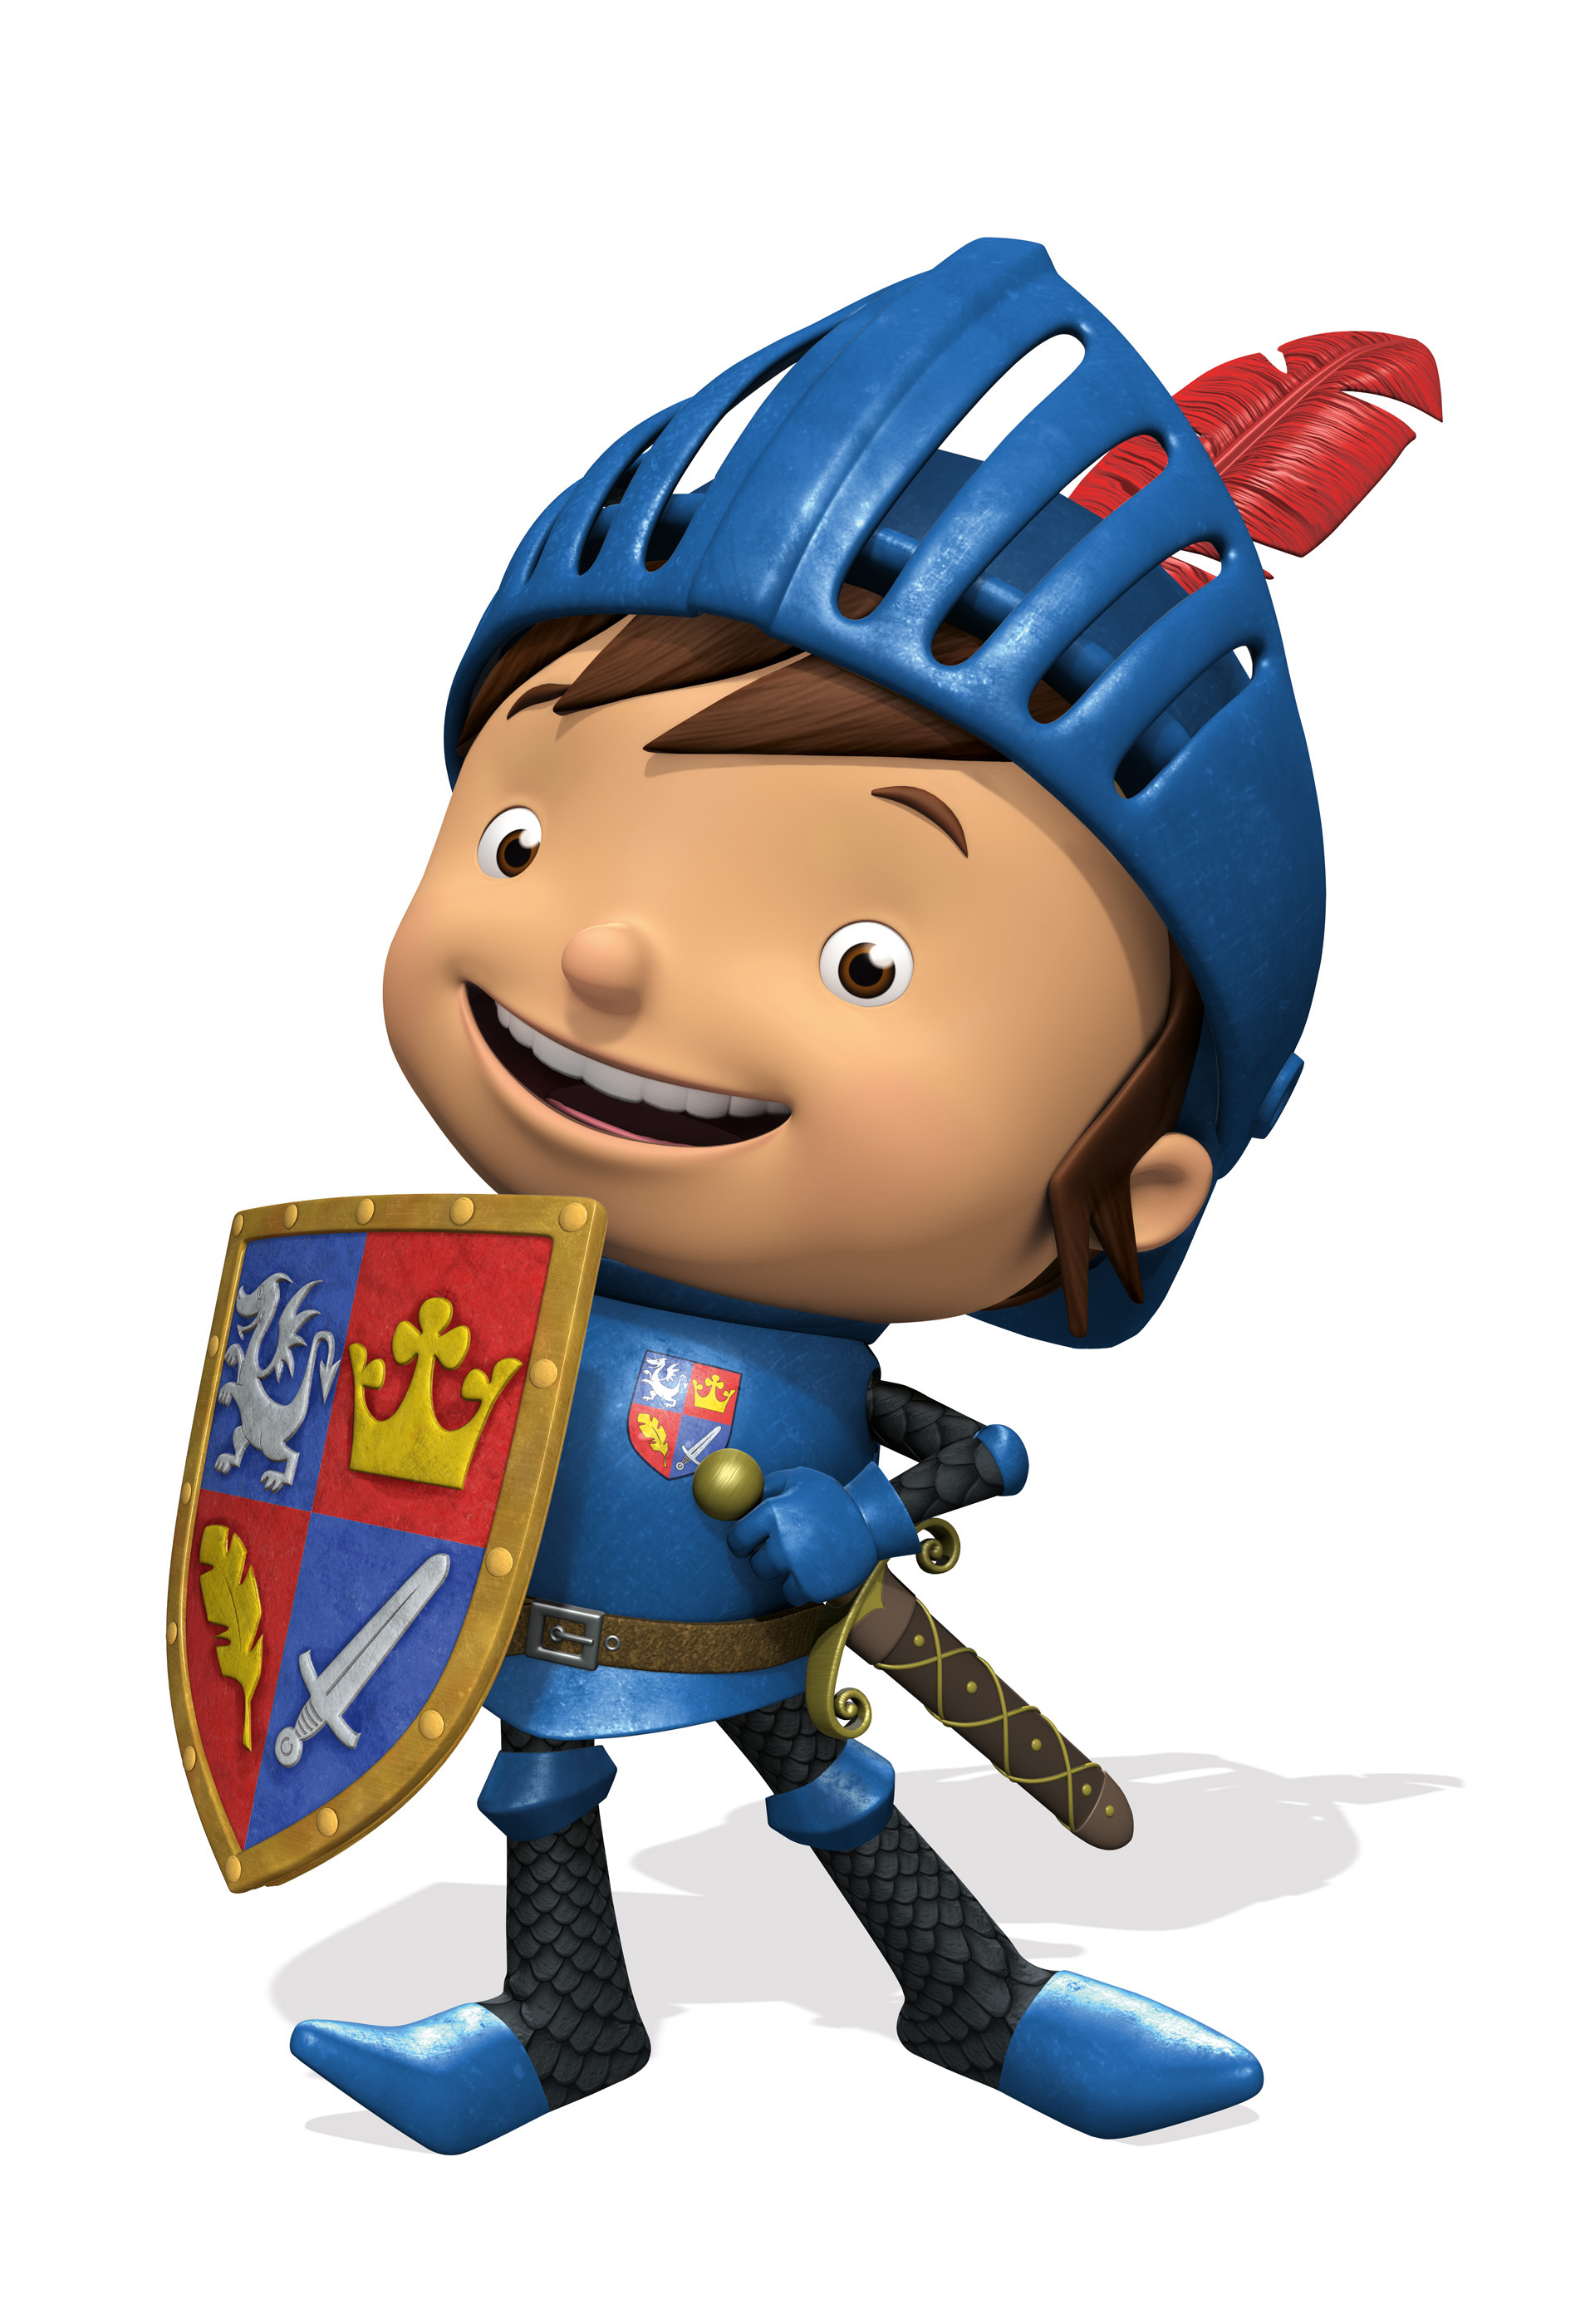 10 Knight In Shining Armor Cartoon Free Cliparts That You Can Download